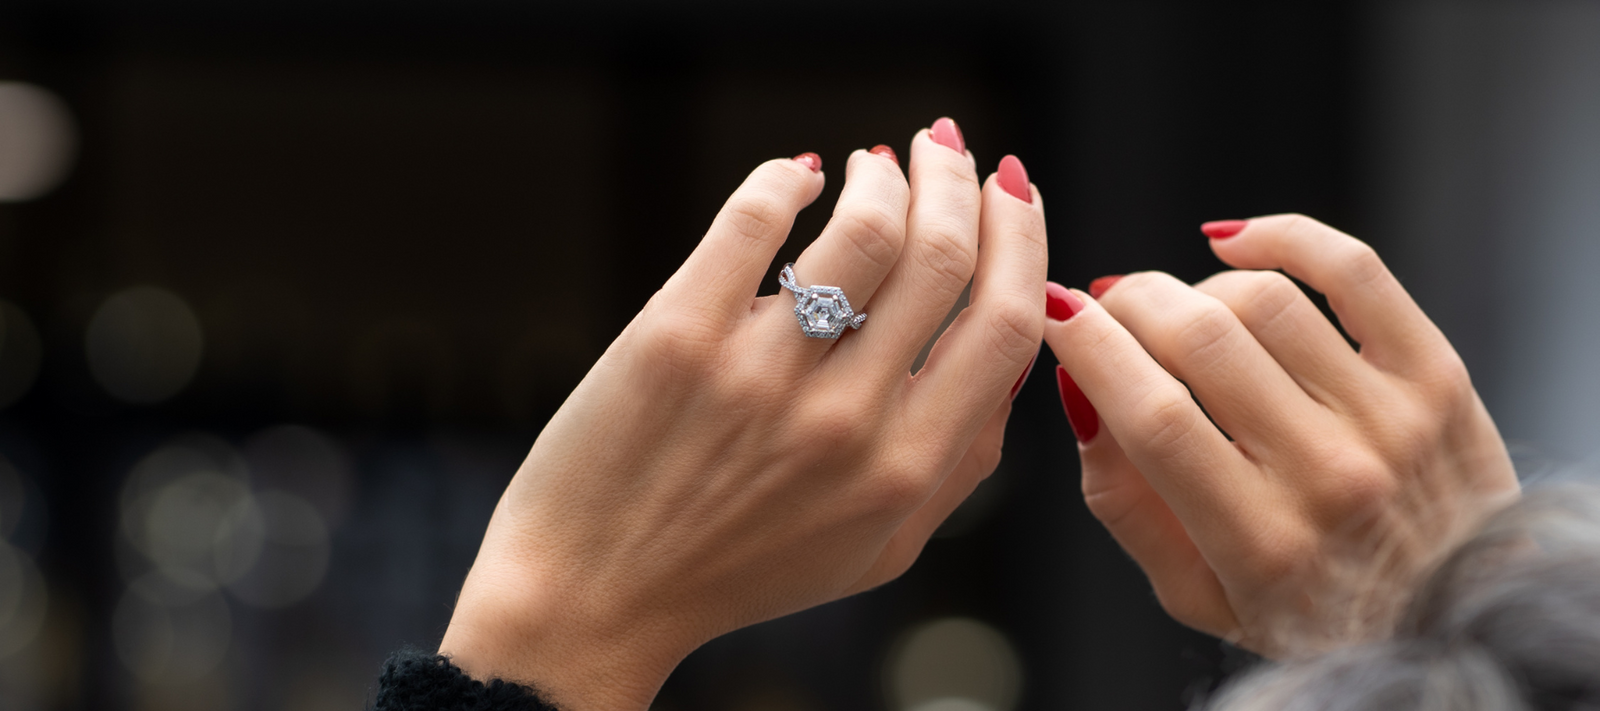 Are diamonds really 'forever'?